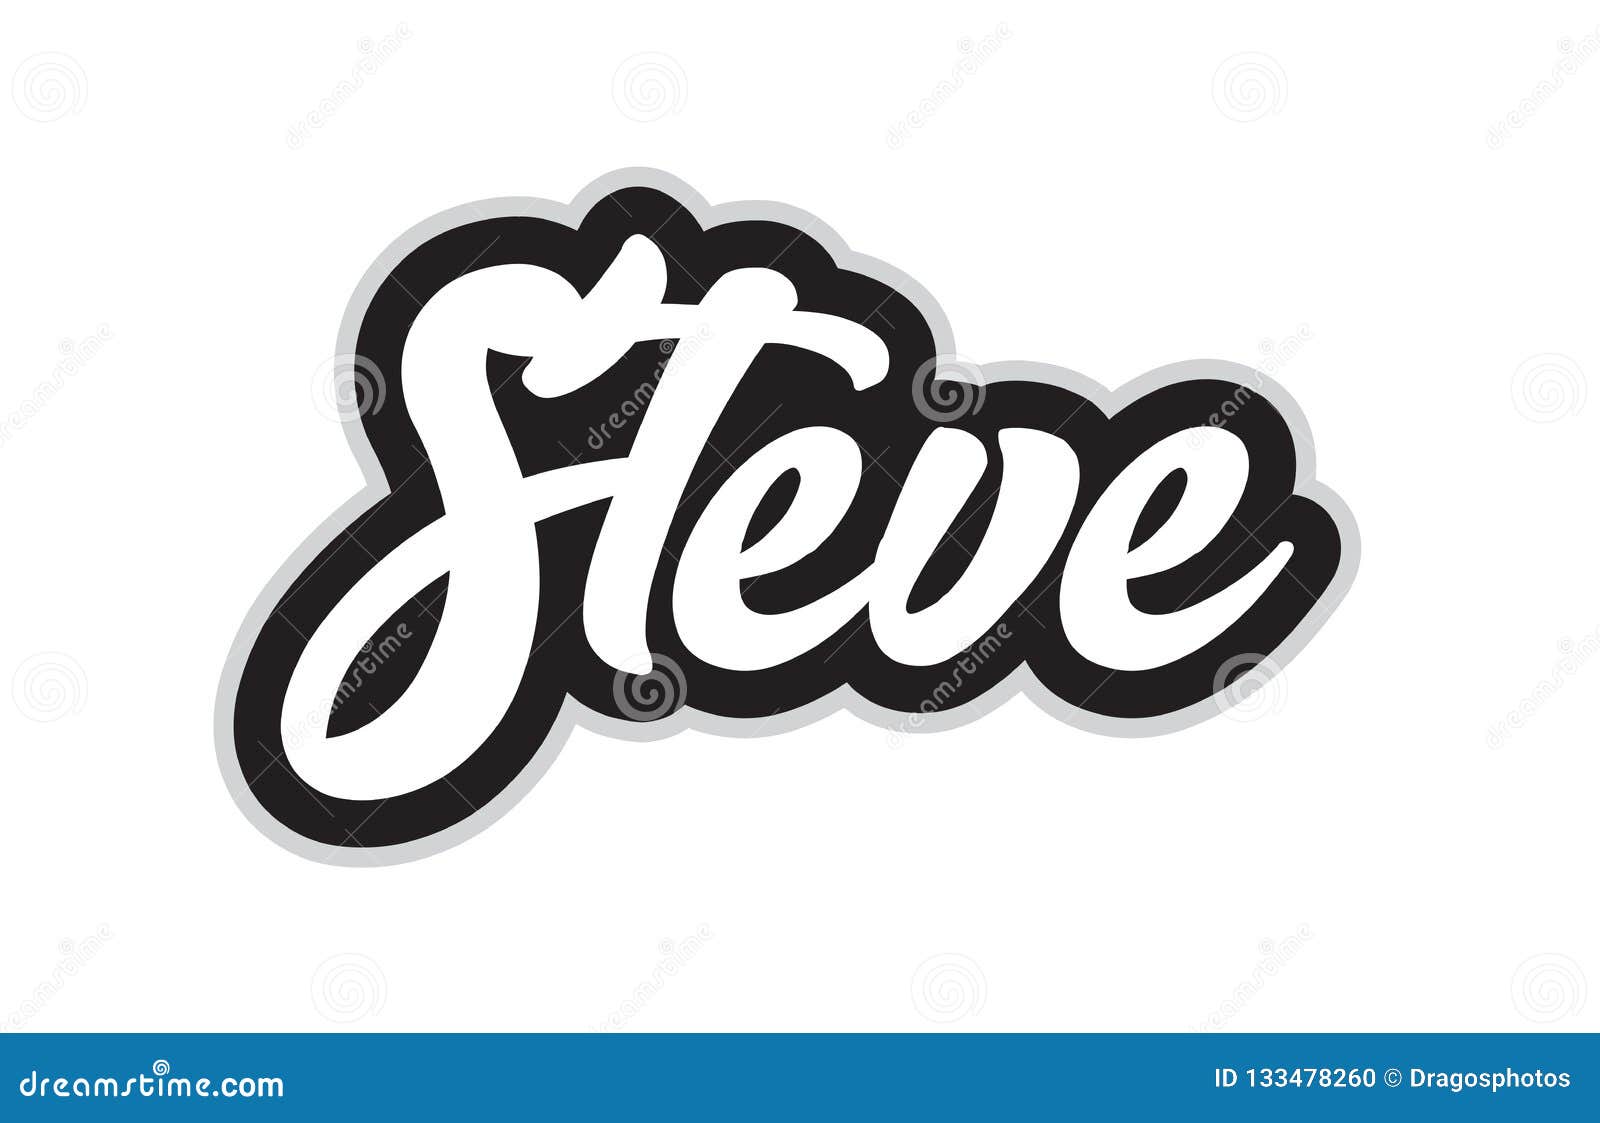 black and white steve hand written word text for typography logo